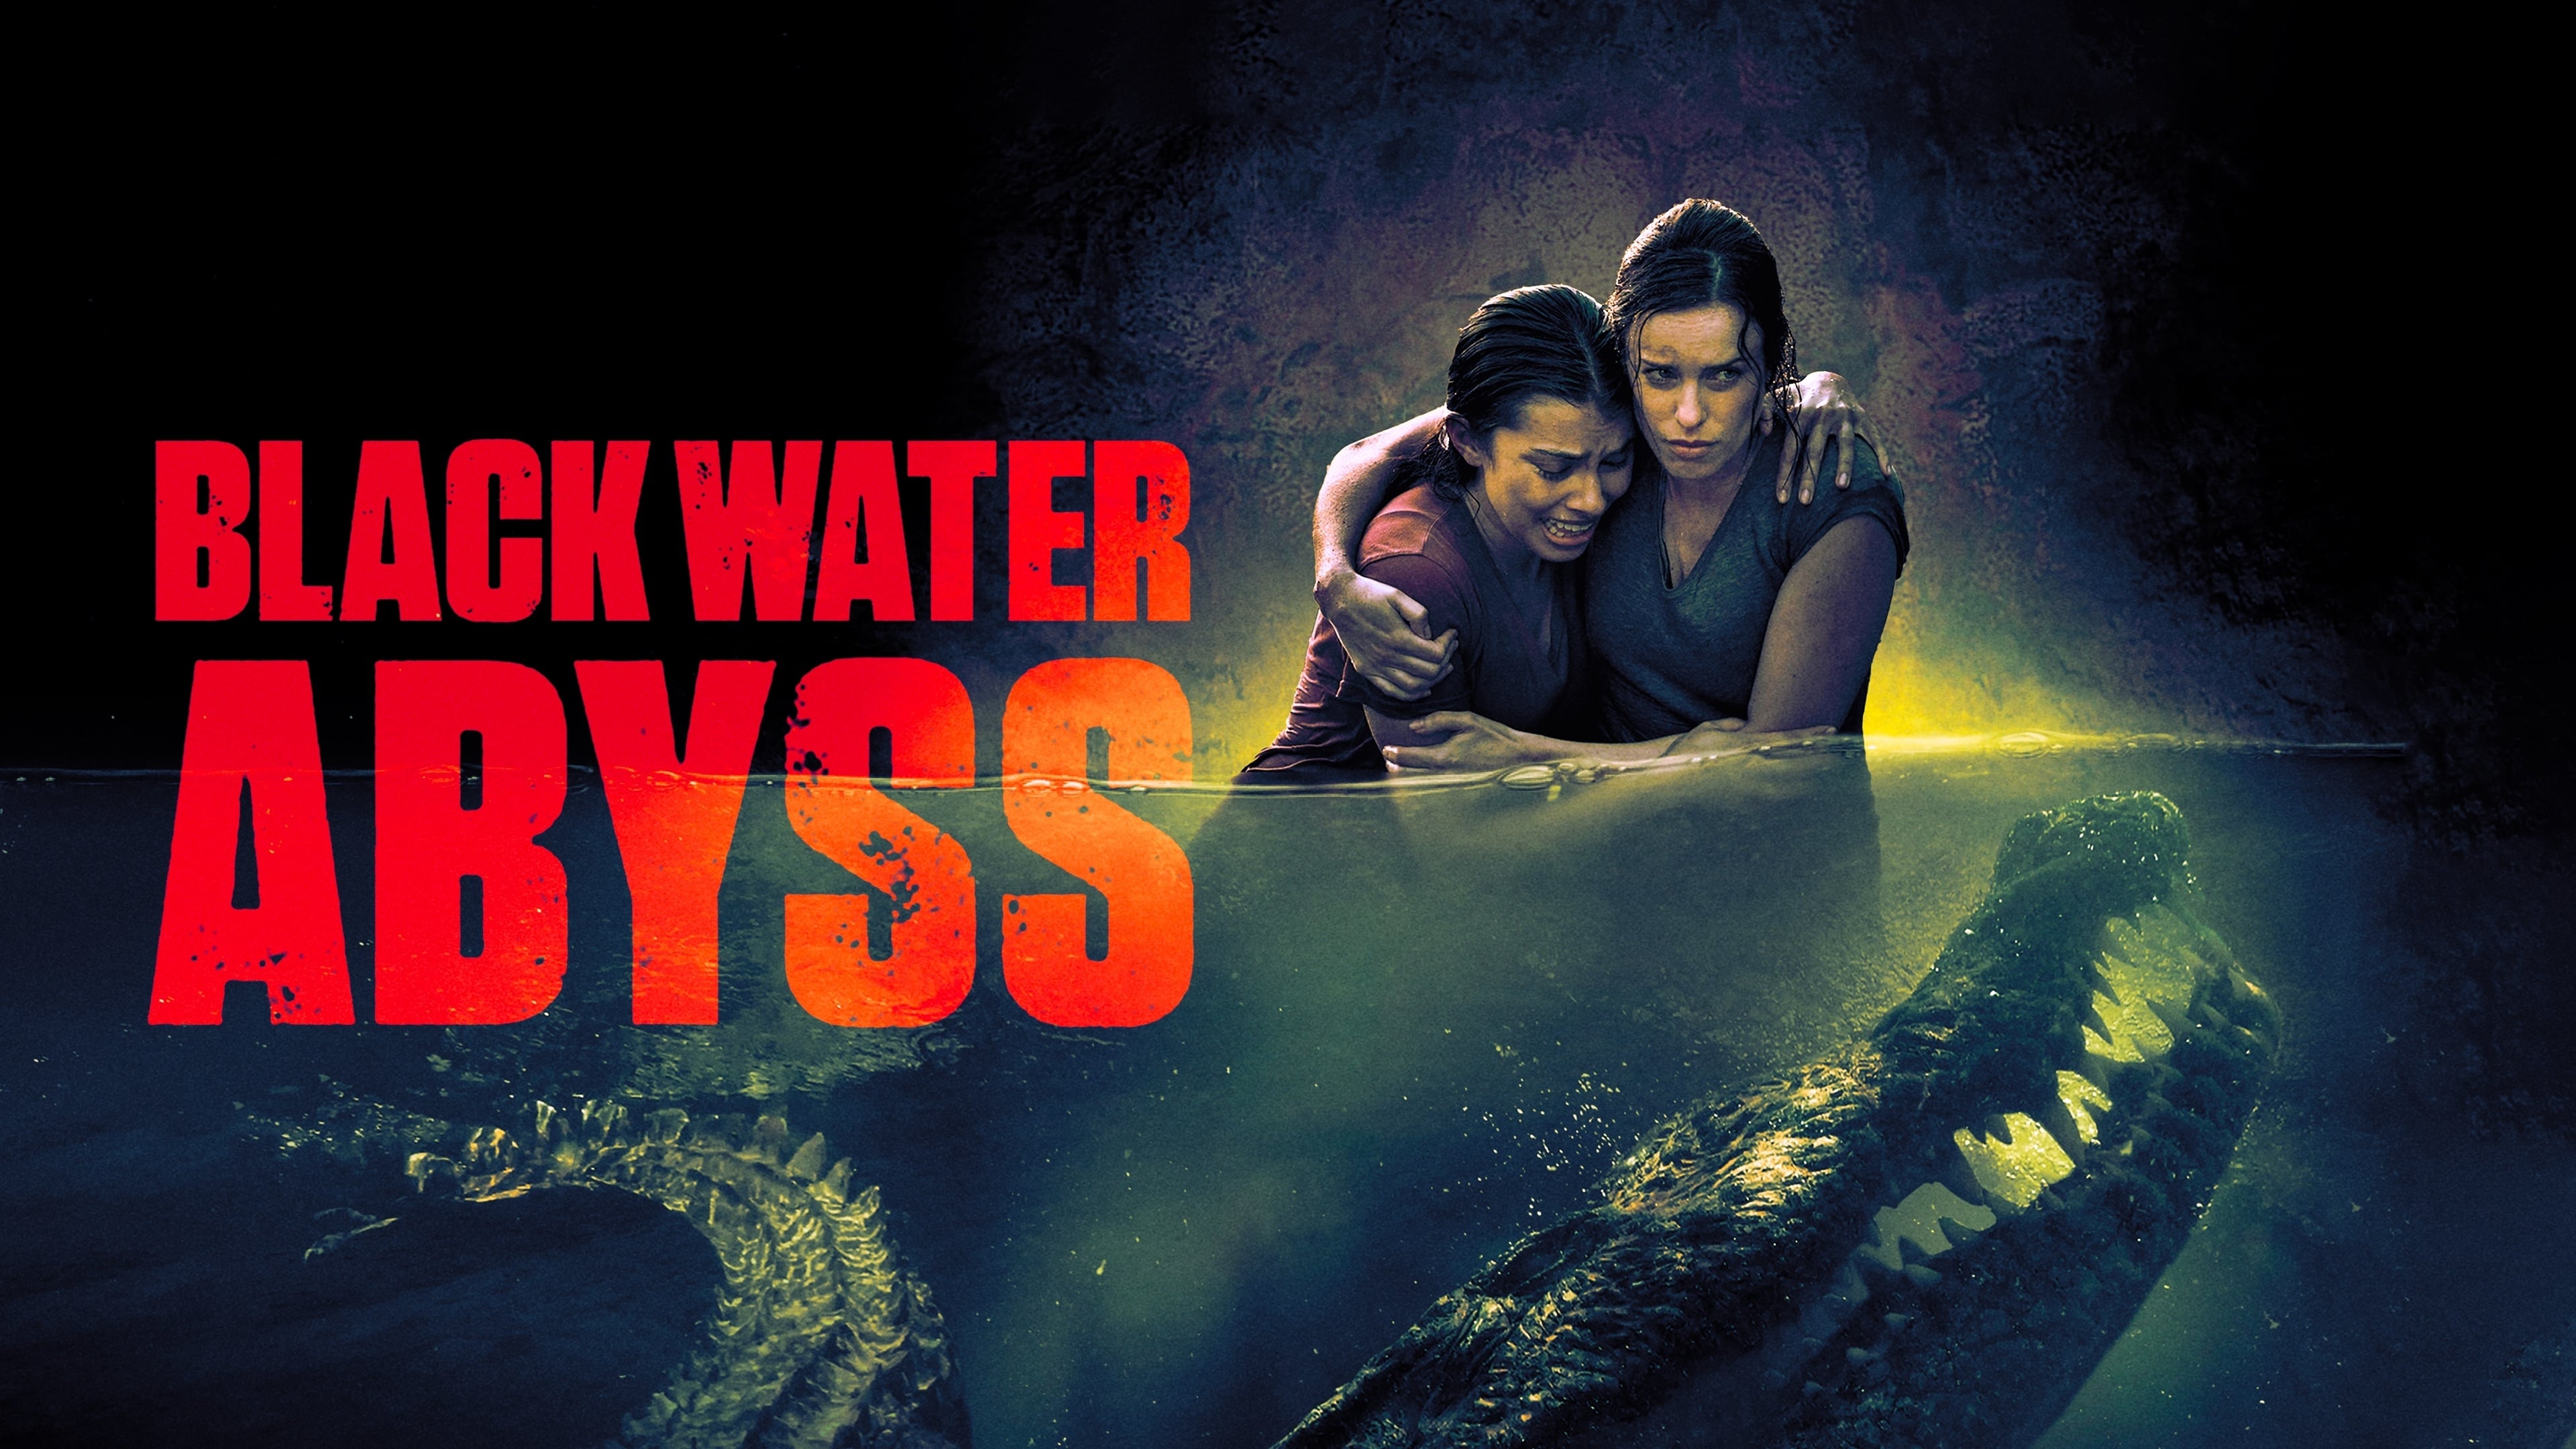 Black Water: Abyss (2020)